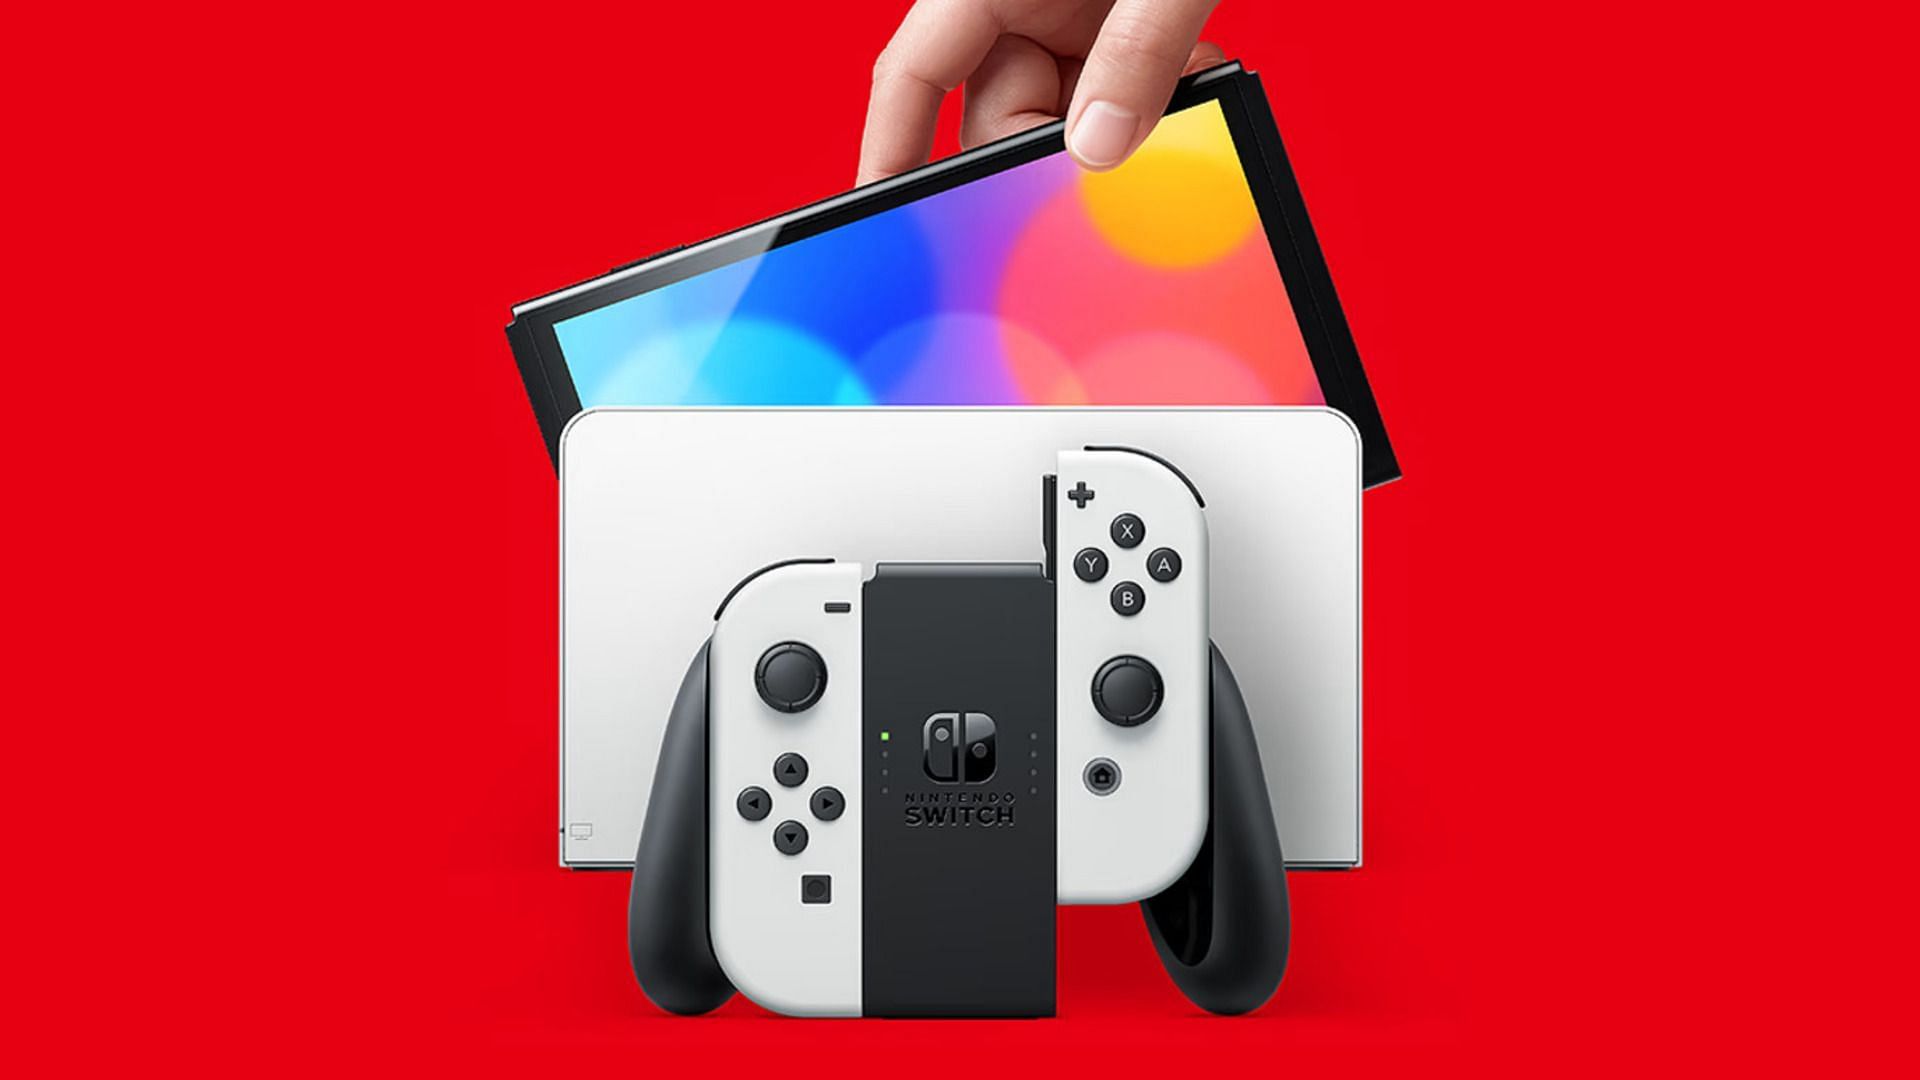 Official imagery for the Nintendo Switch (Image via Nintendo)